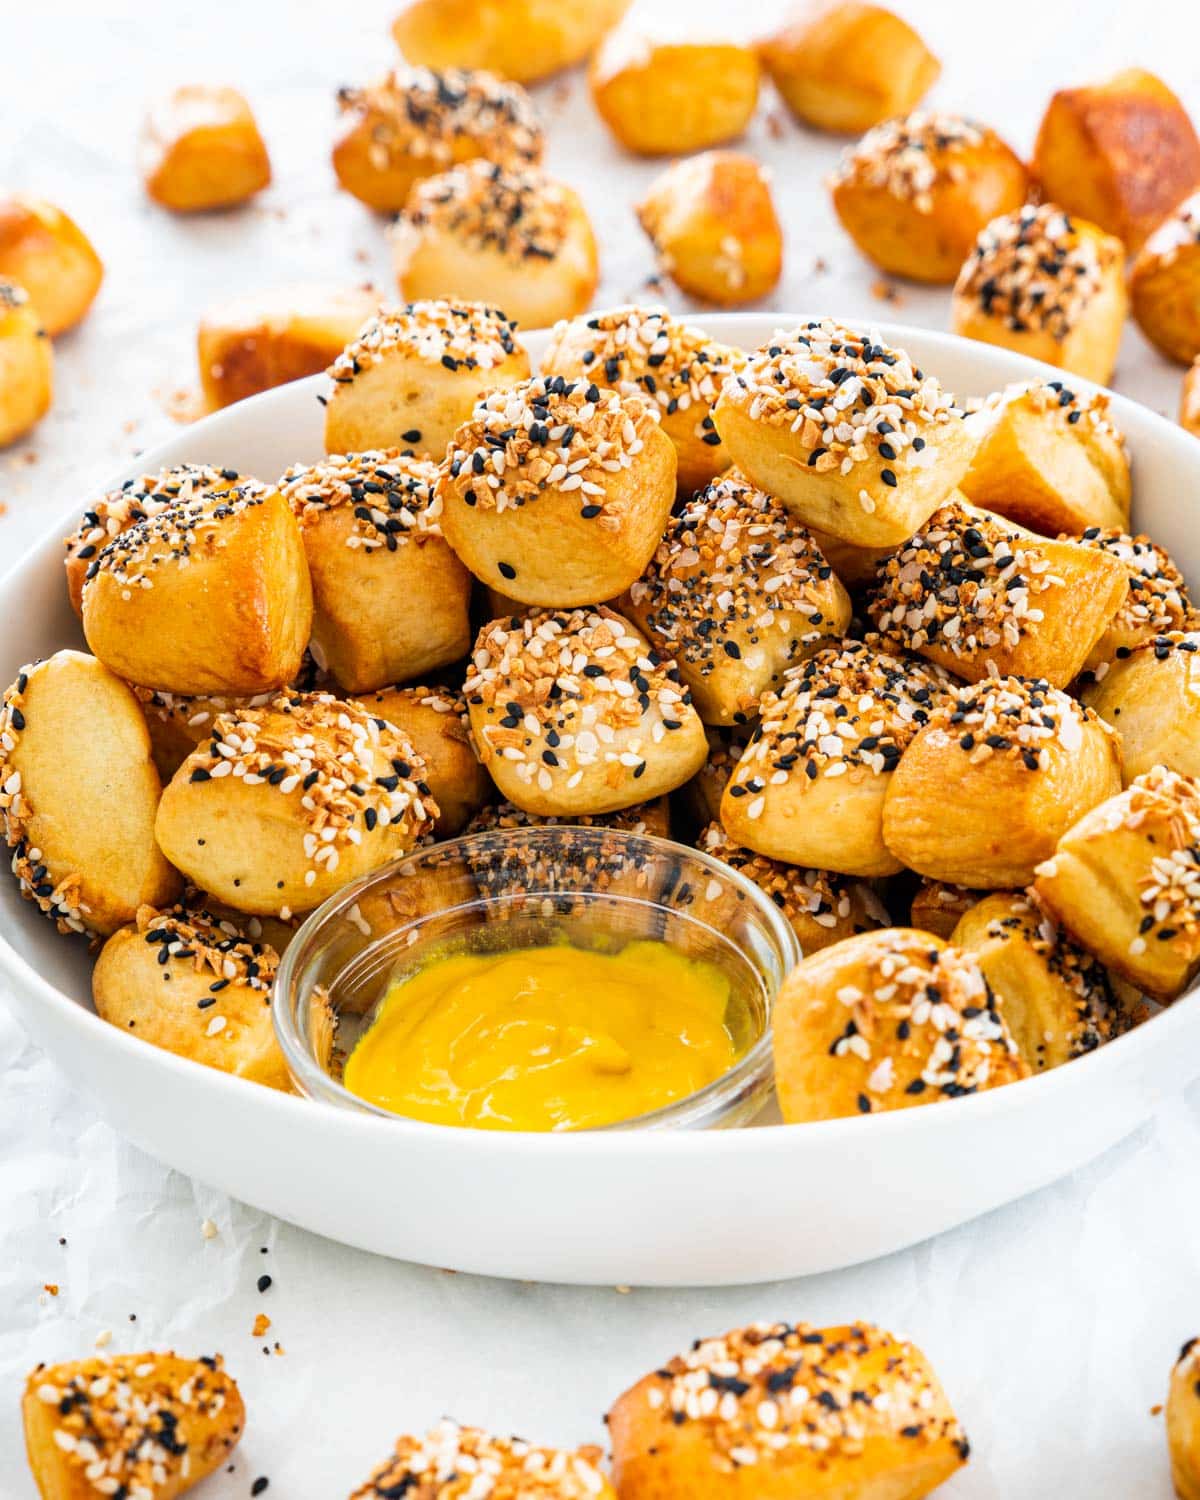 pretzel bites in a white bowl with a side of mustard